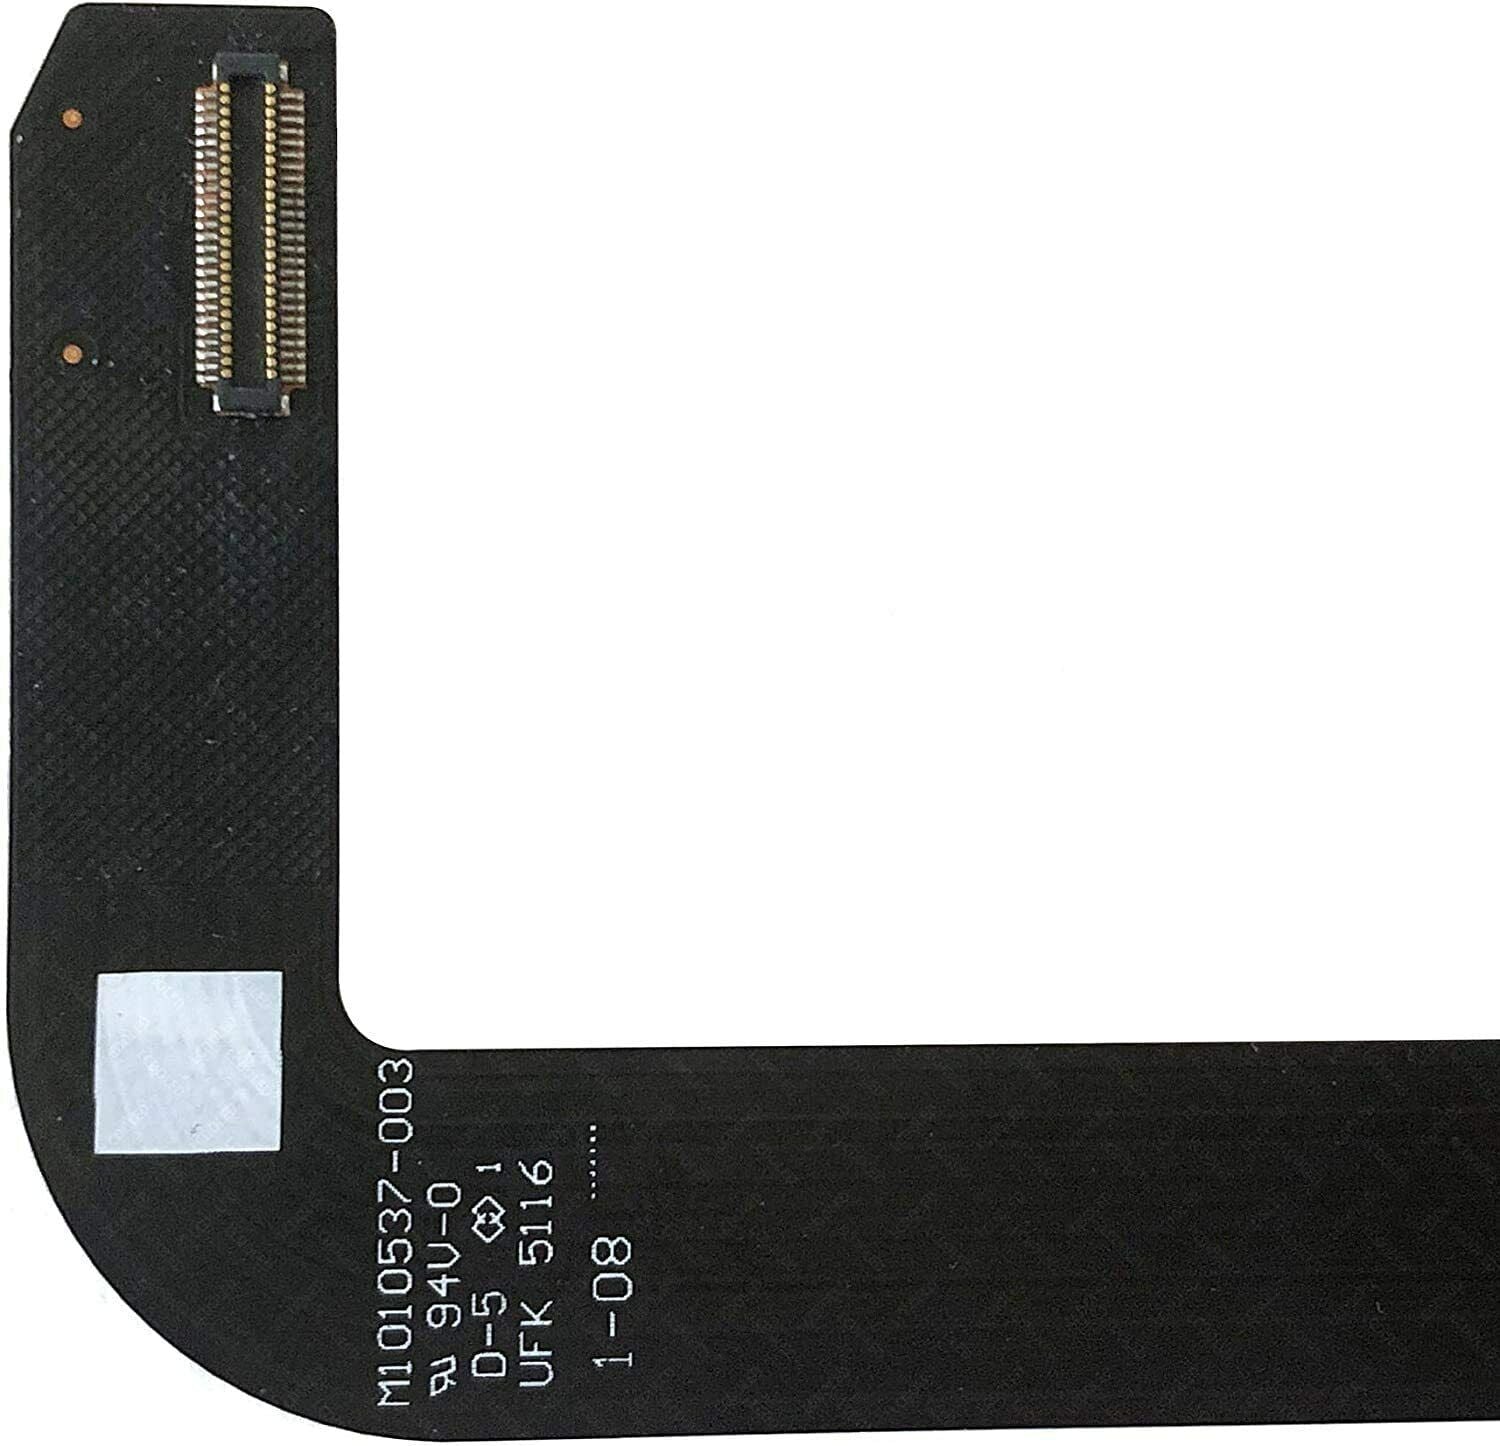 Microsoft New LCD LED Display Video Touch Screen Digitizer Flex Cable Surface Pro 4 1724 LG LCD Only M1010537-003